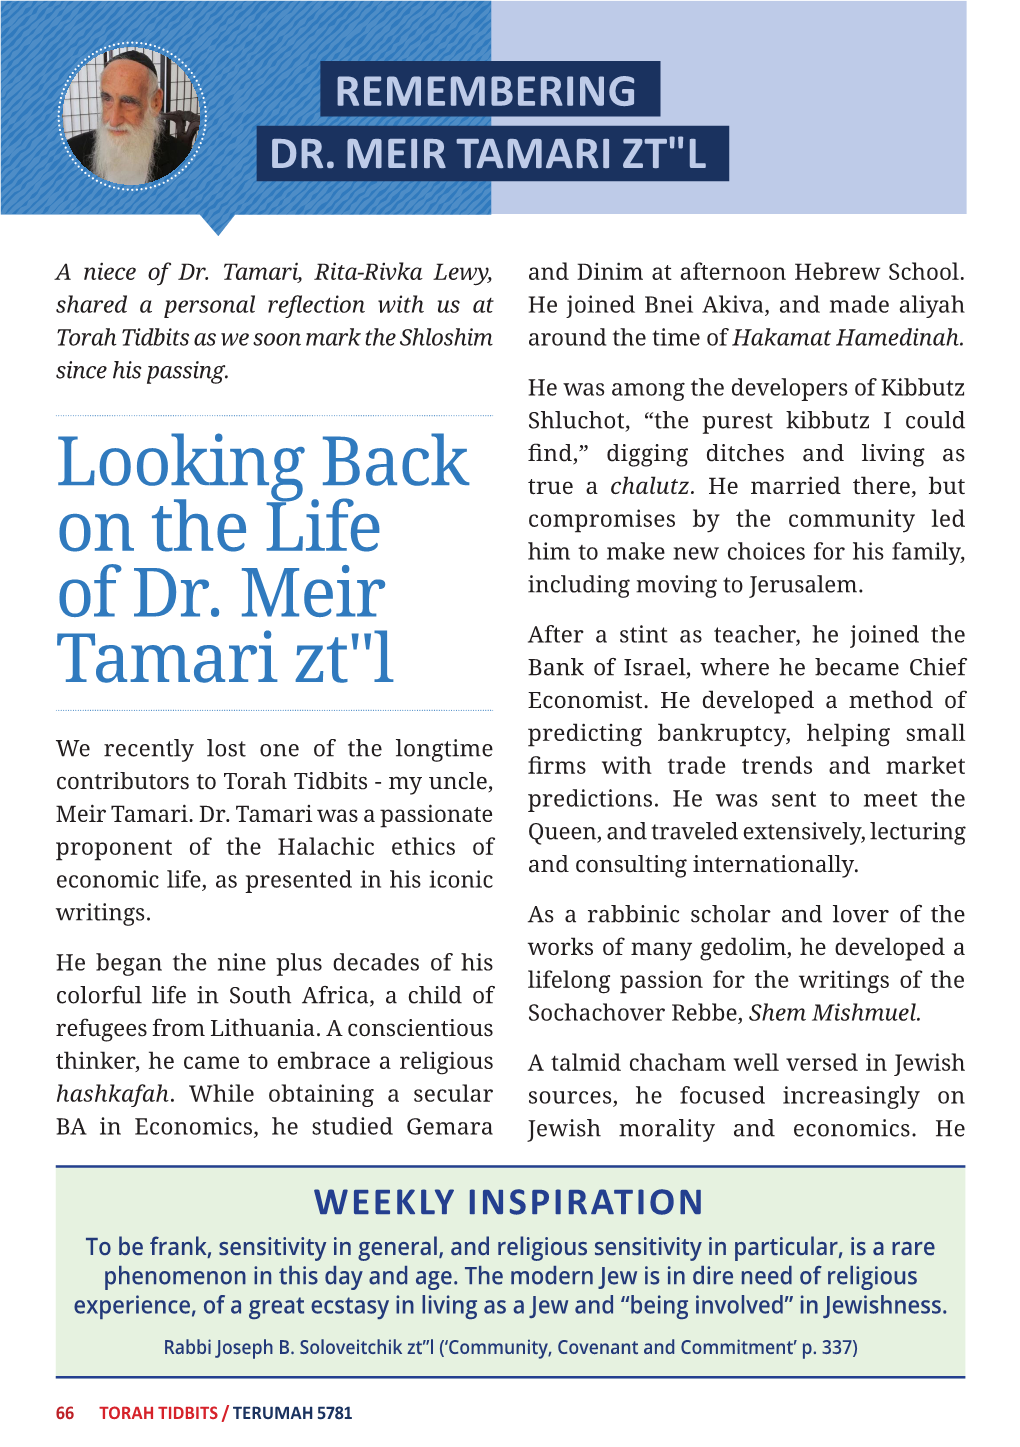 Looking Back on the Life of Dr. Meir Tamari Zt"L